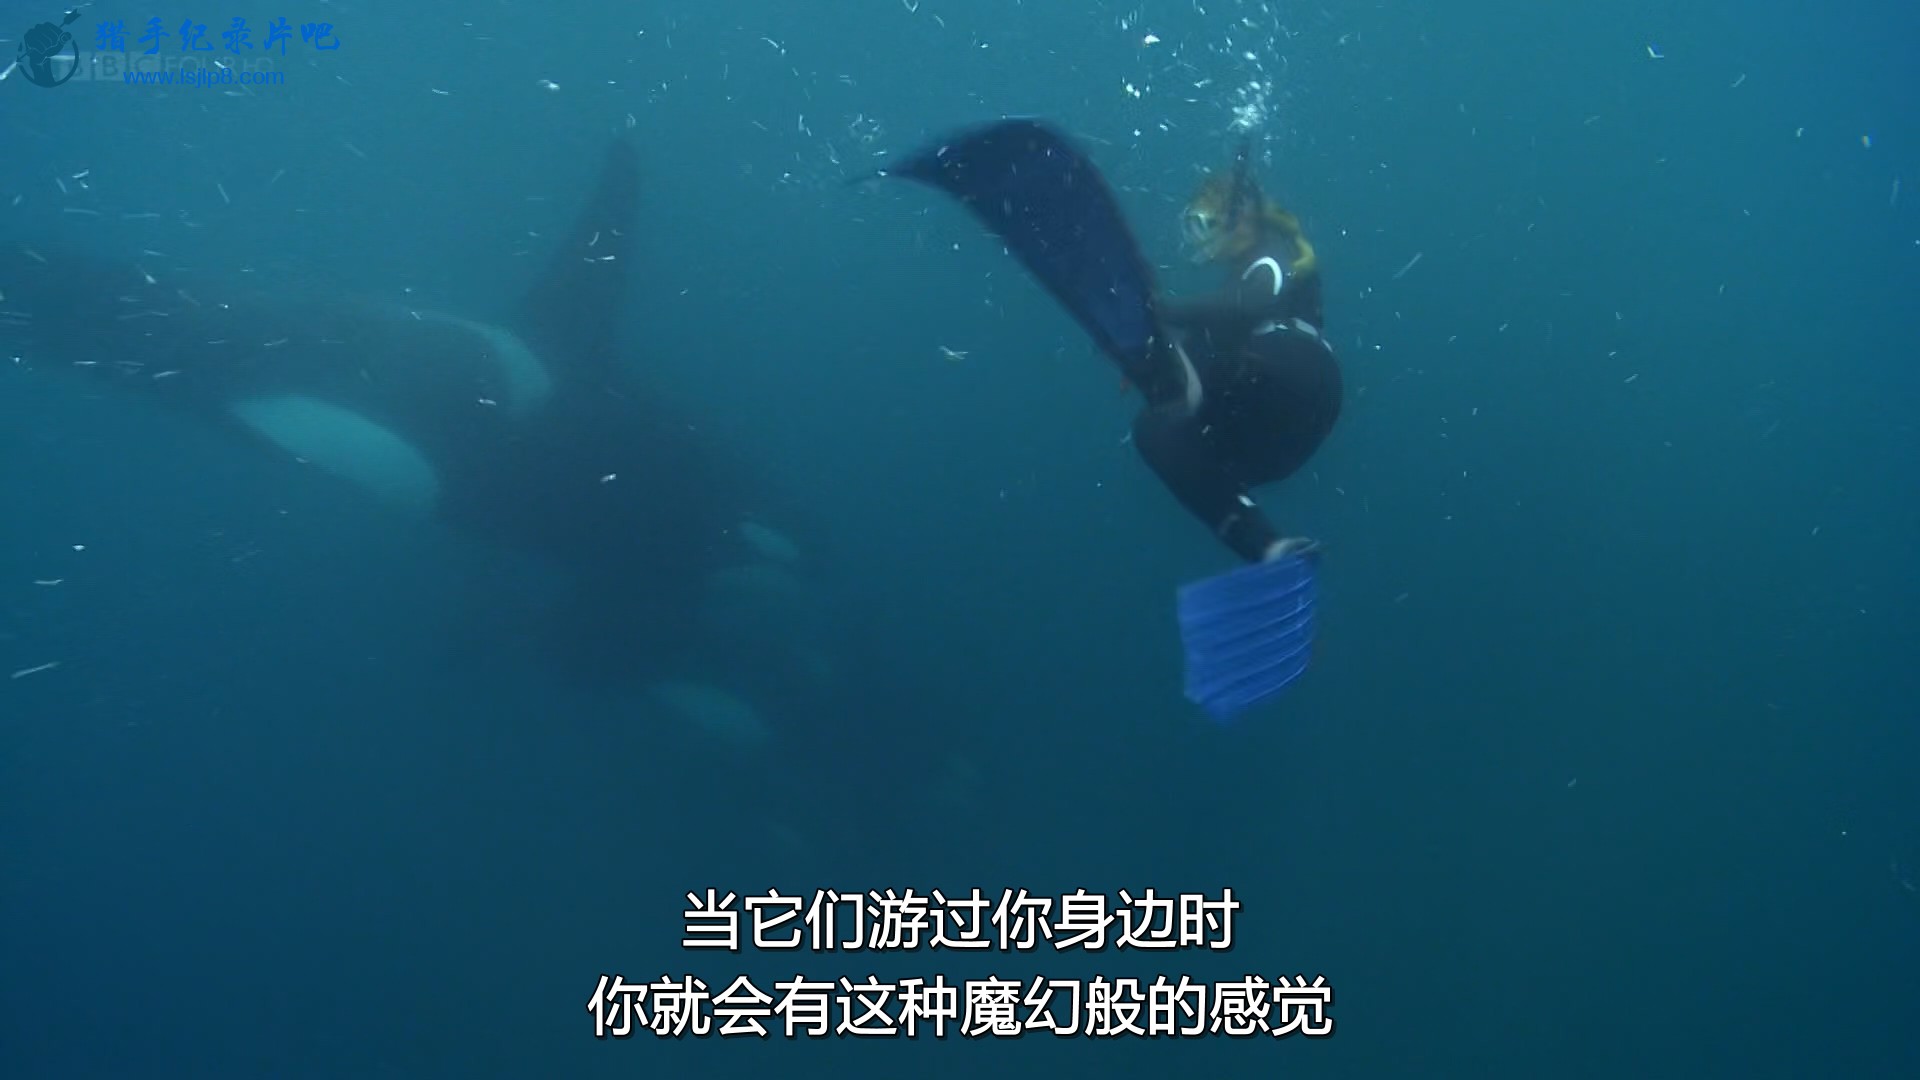 BBC.Natural.World.2011.The.Woman.Who.Swims.with.Killer.Whales.1080p.HDTV.x265.AA.jpg